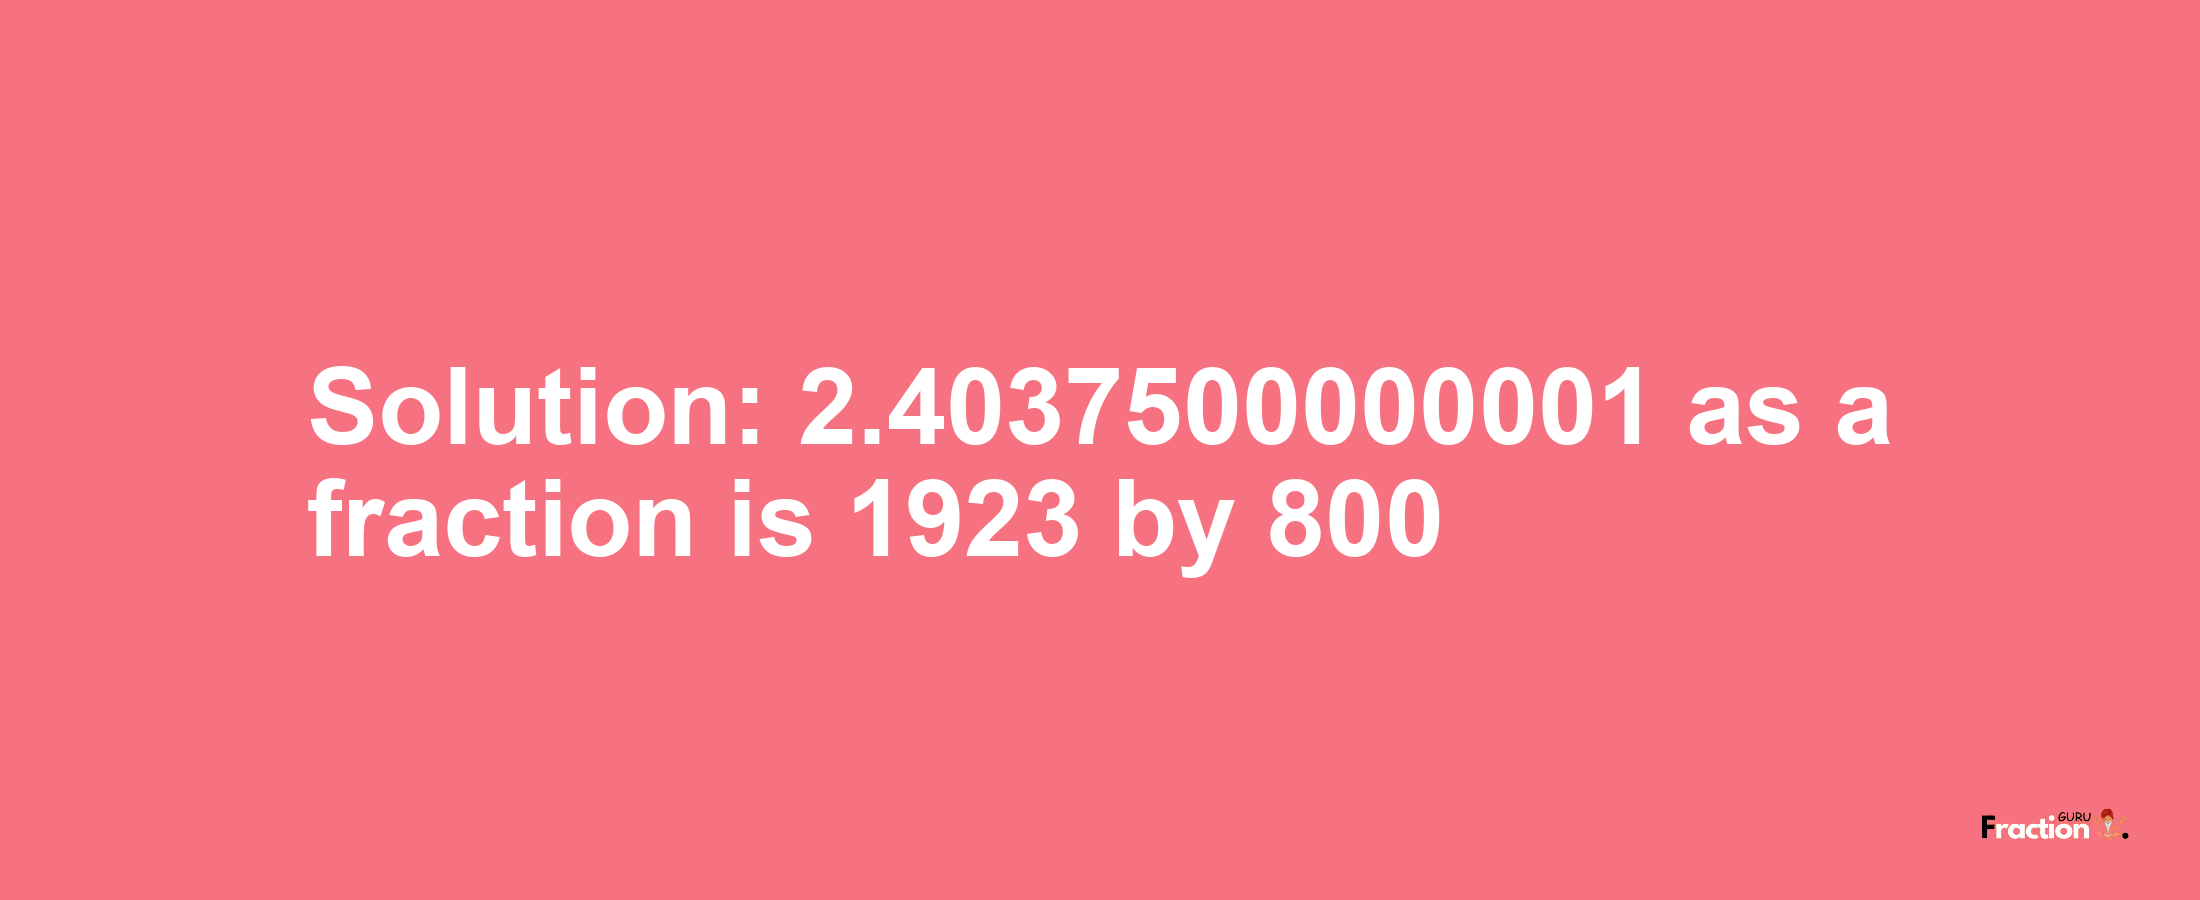 Solution:2.4037500000001 as a fraction is 1923/800